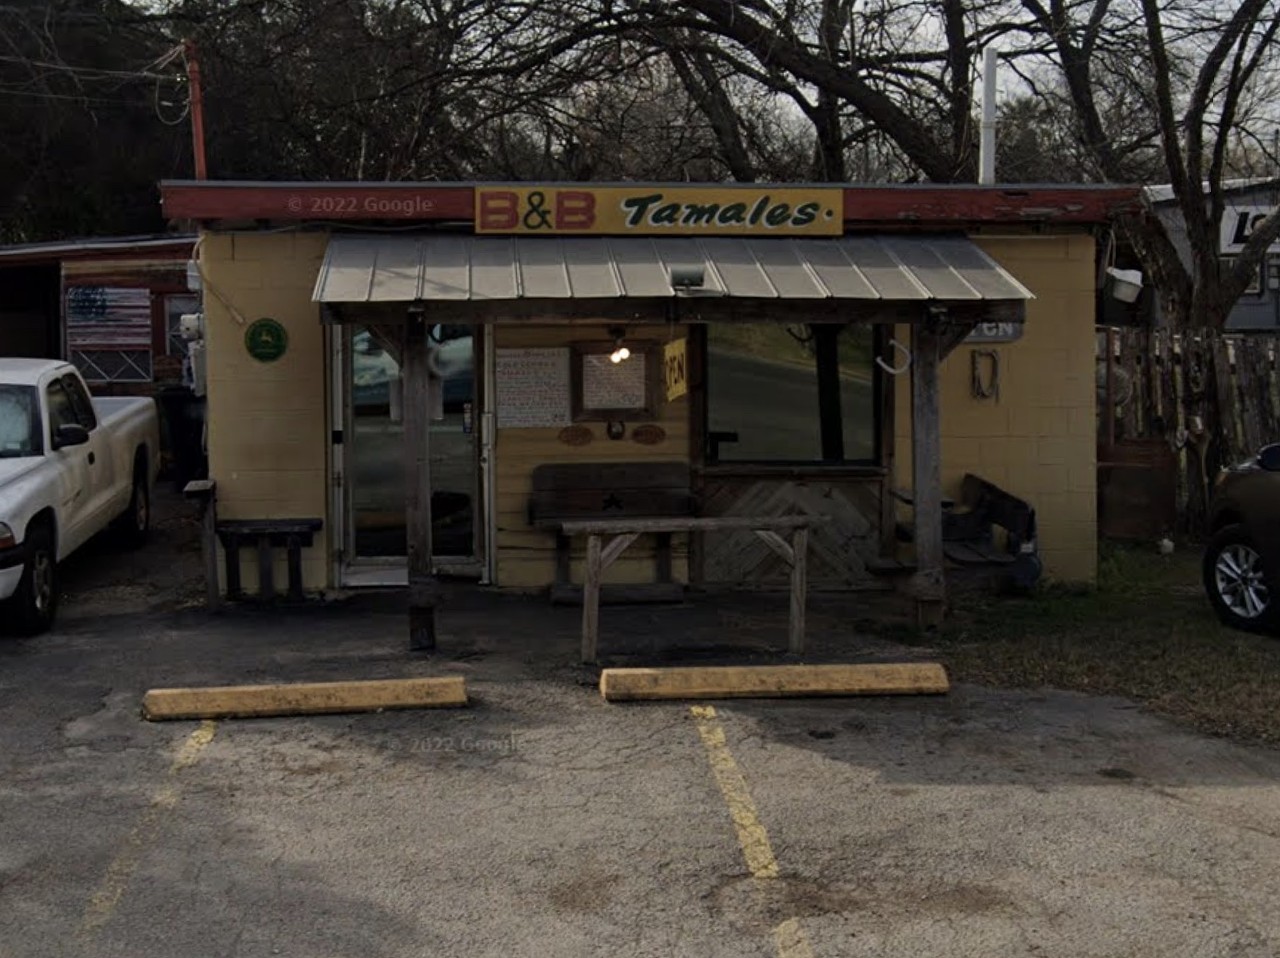 B & B Tamales and Food To Go
866 W. Mayfield Blvd., (210) 921-0847
While this little tamale shop may not look like much from the street, locals can attest to its craveable tamales and barbacoa, and the friendly staff. Be sure to stock up if you’re not in the neighborhood — we promise the tamales are just as tasty when you reheat them.